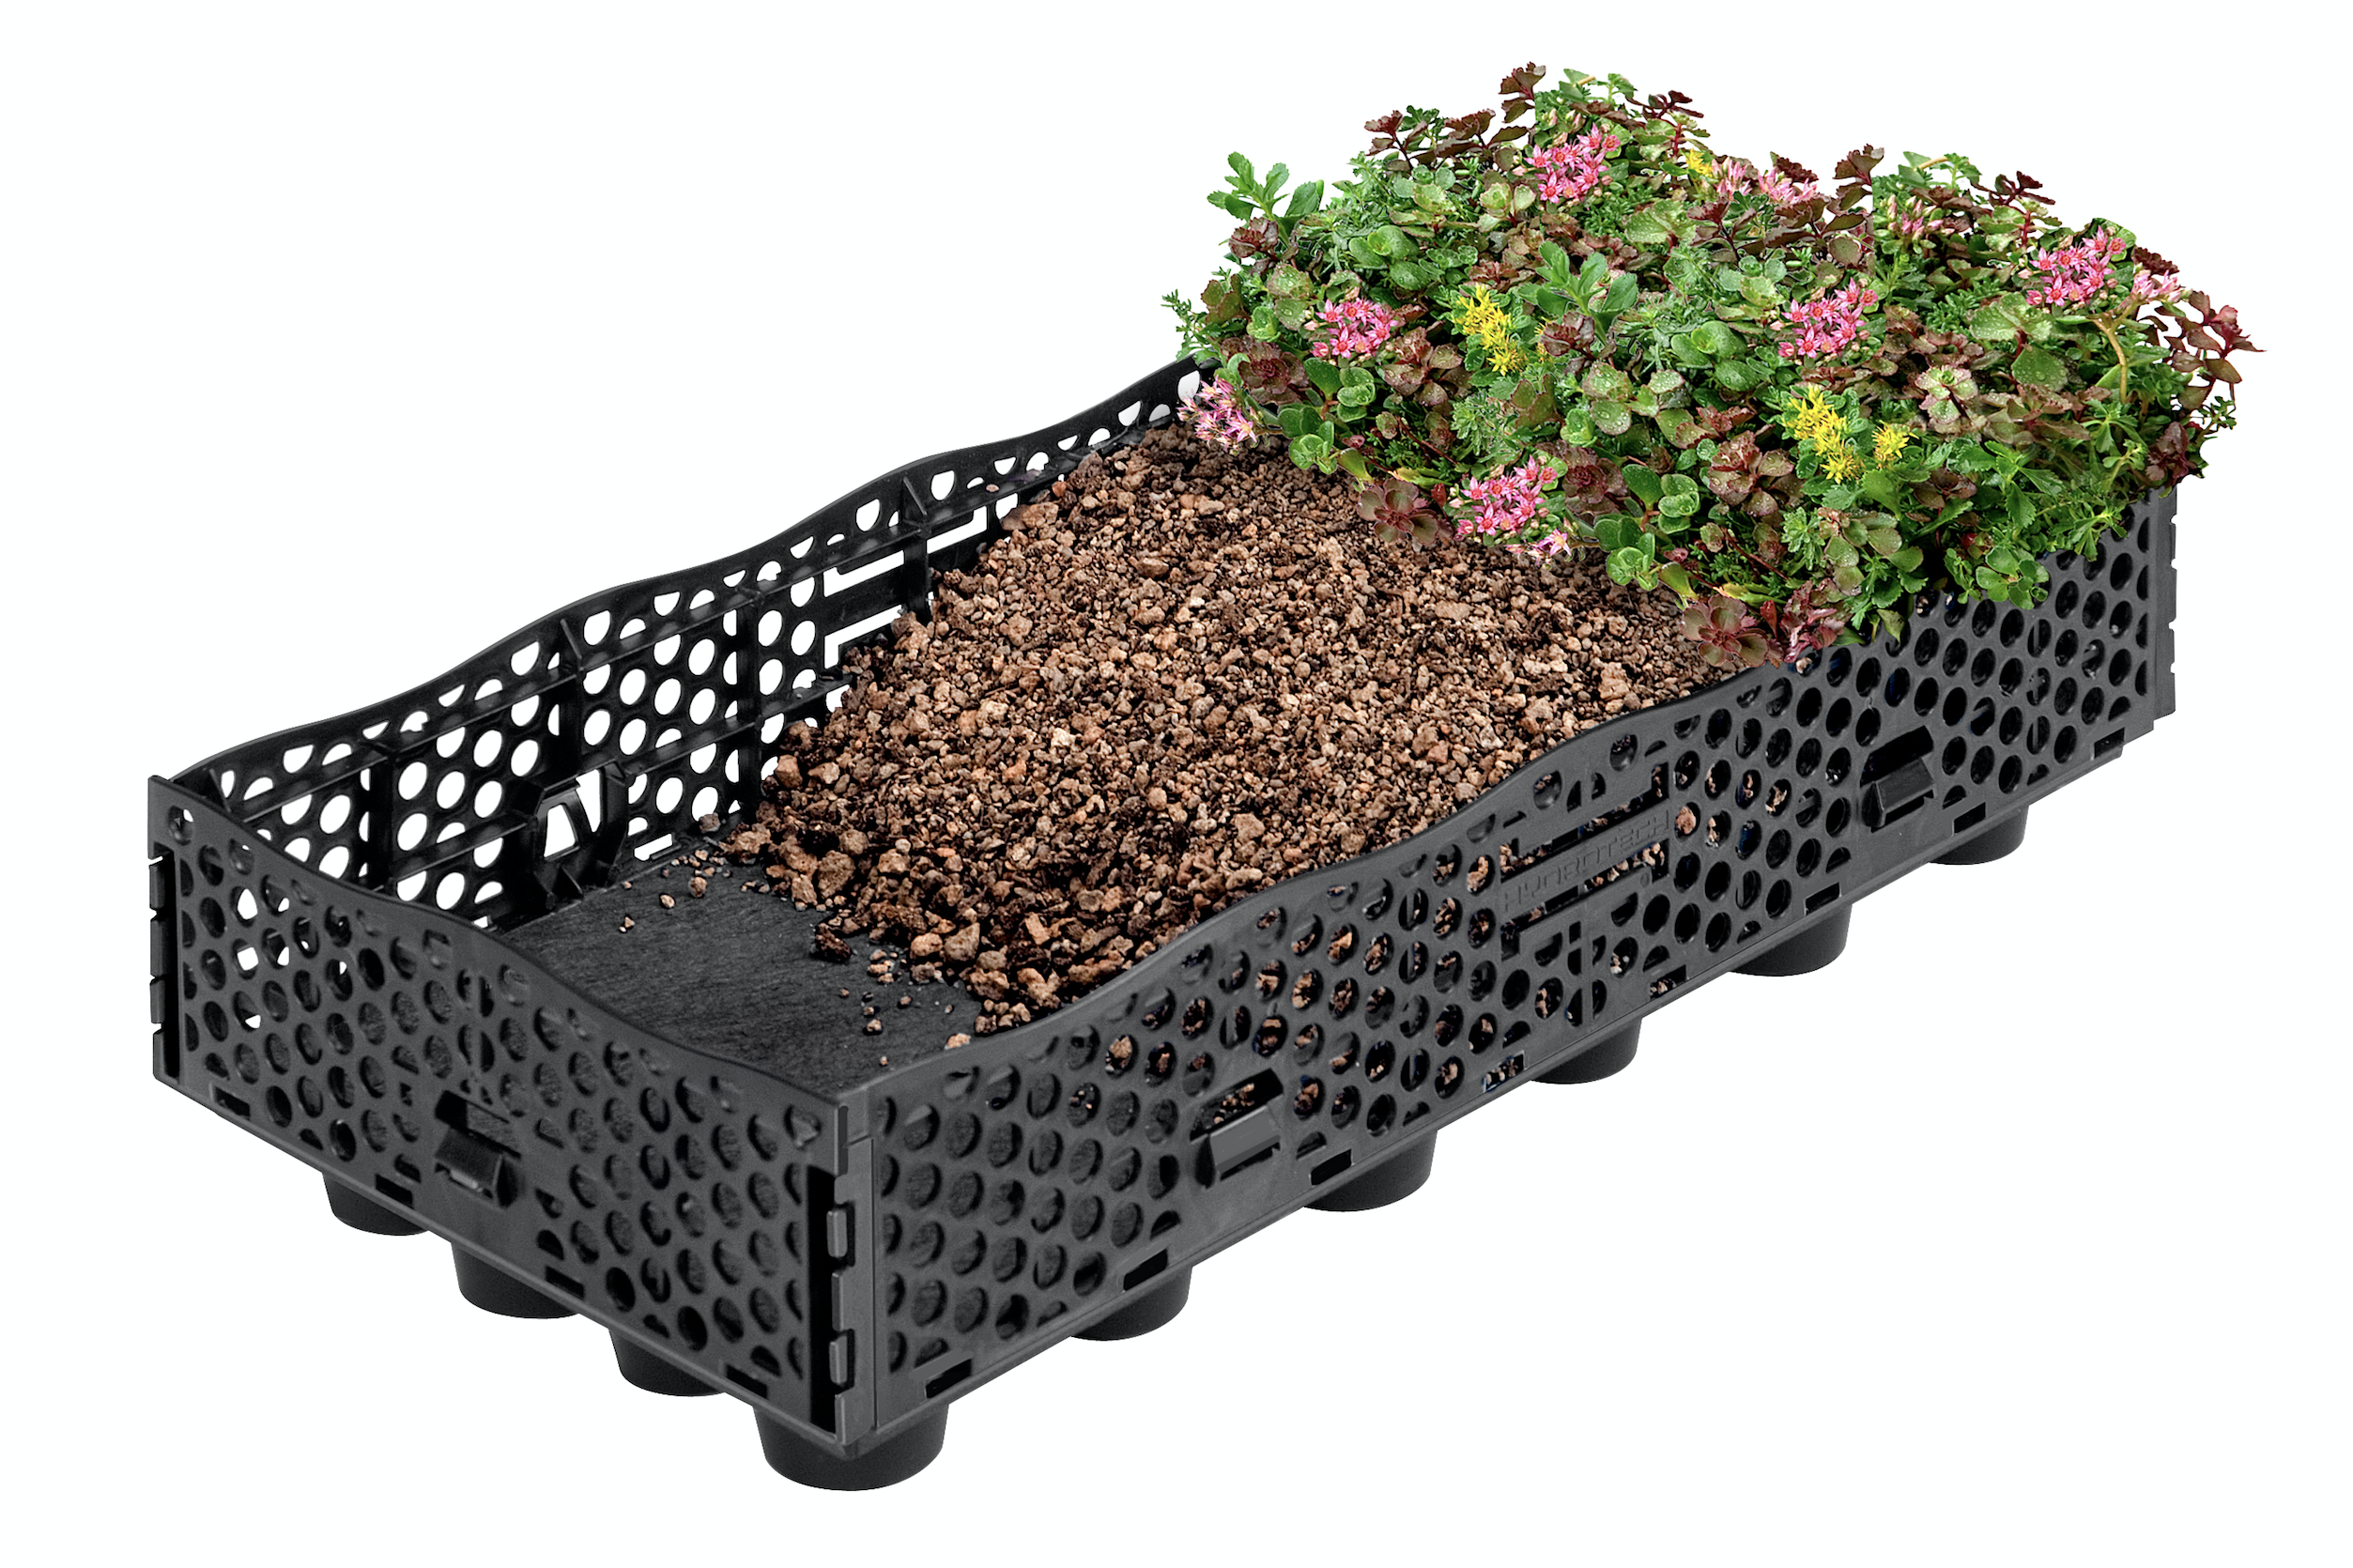 American Hydrotech introduces the InstaGreenGT-4 pre-vegetated tray